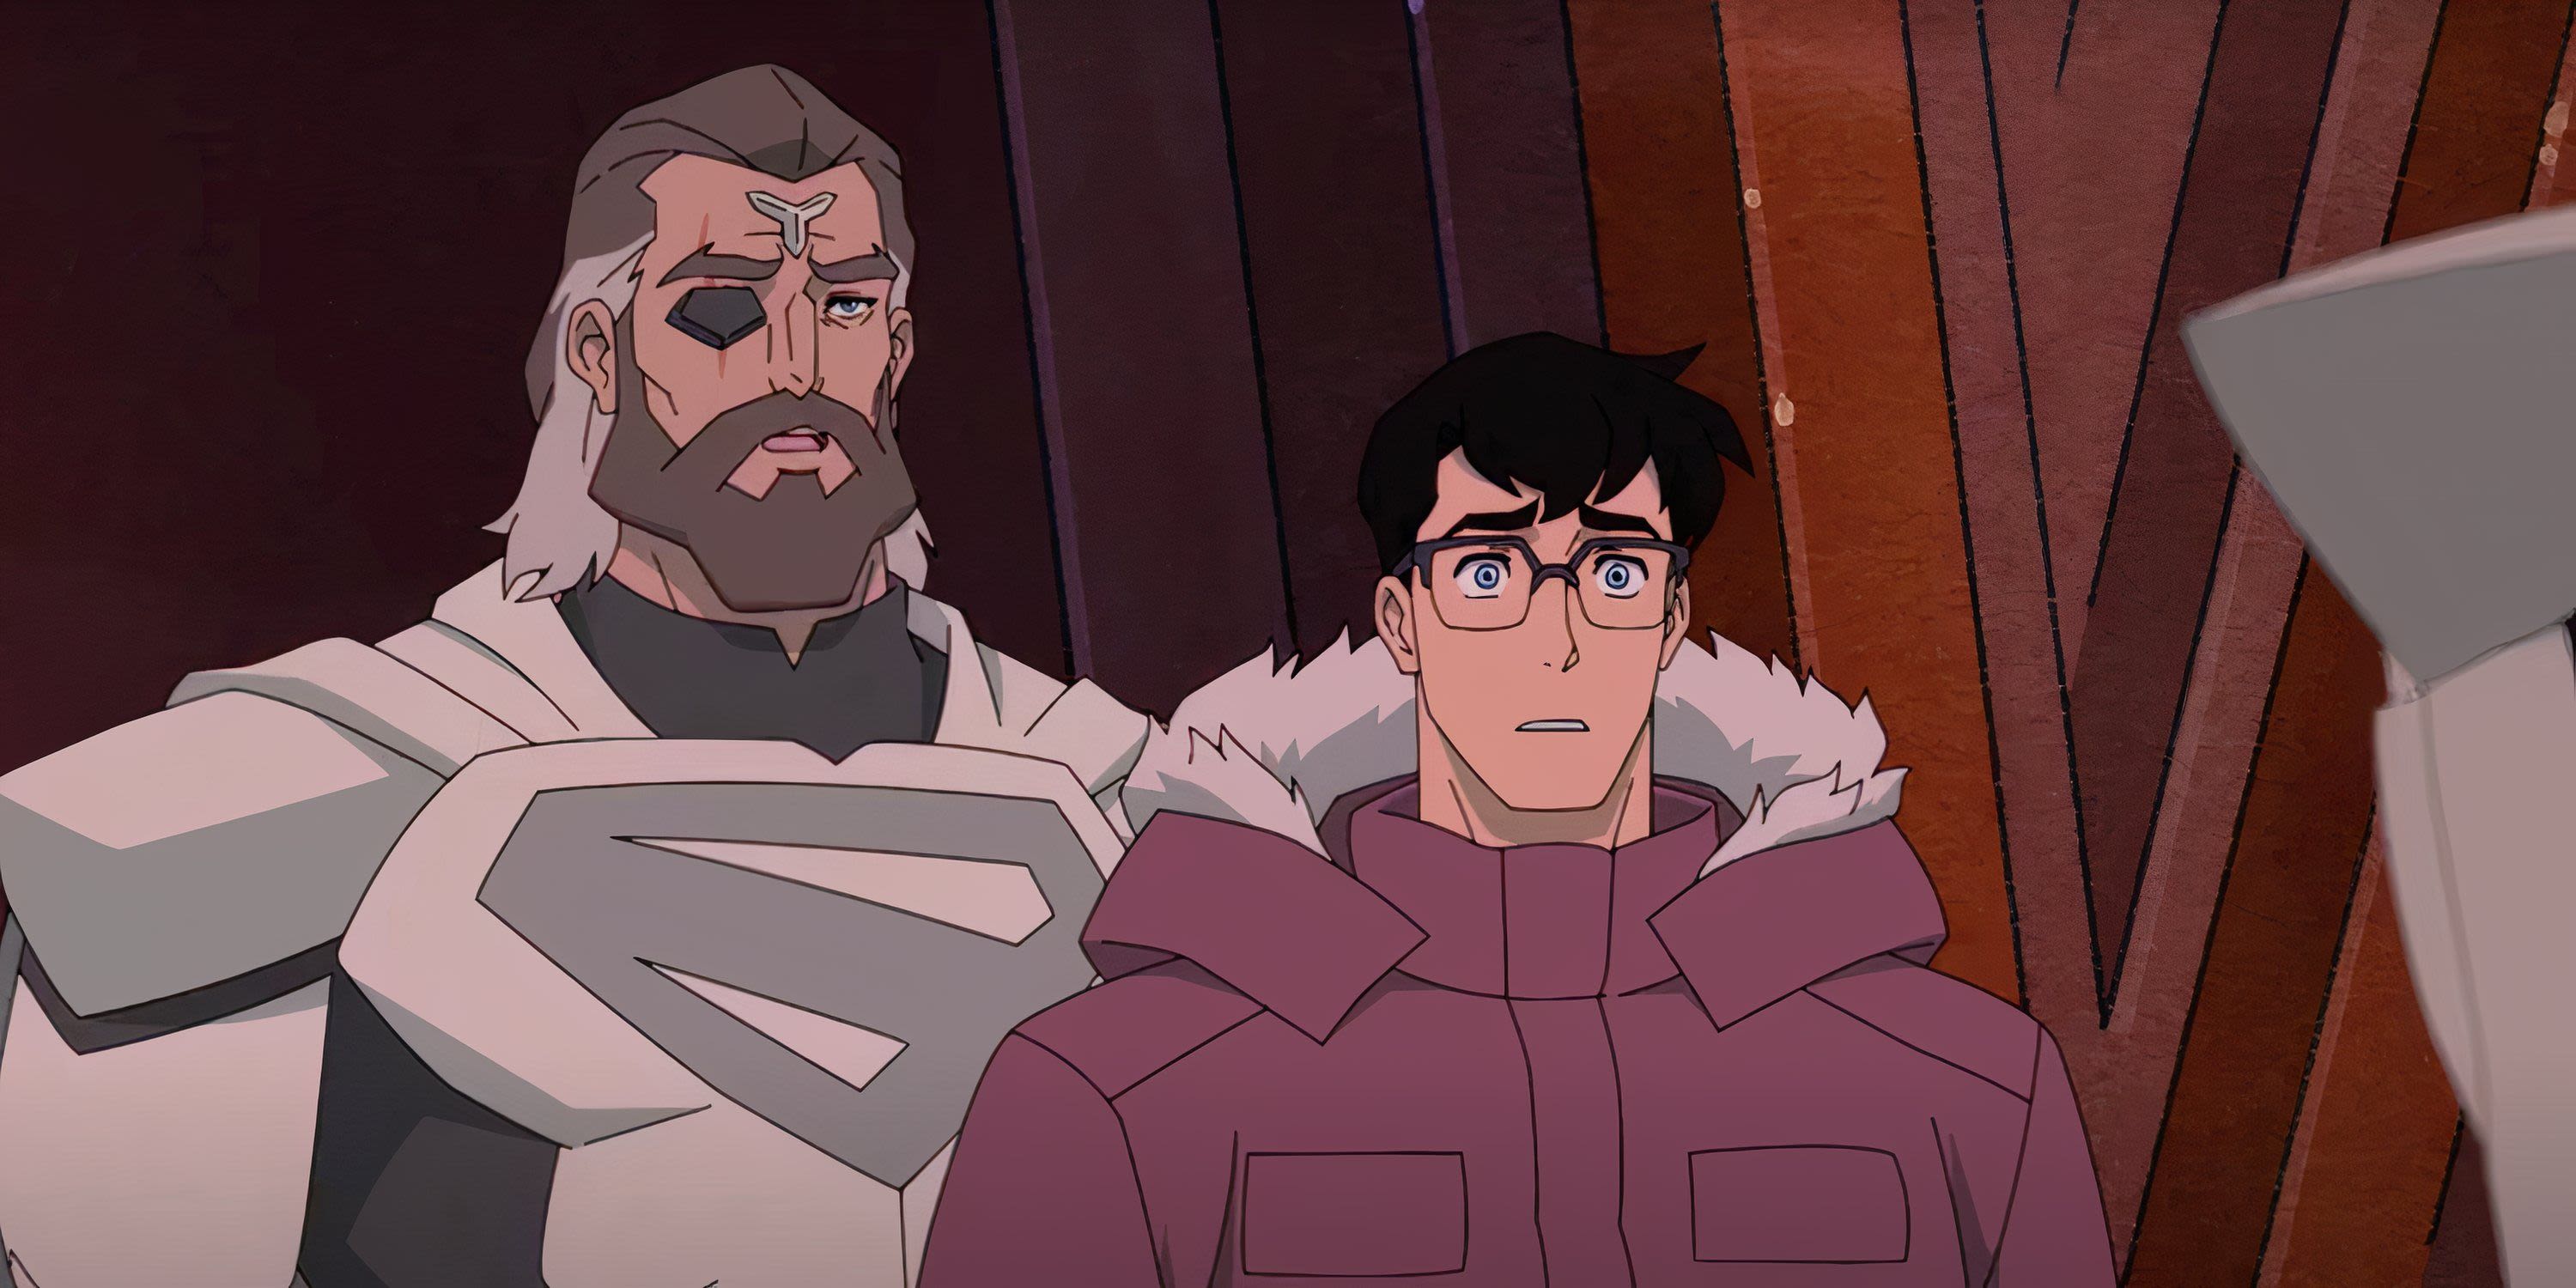 My Adventures With Superman Season 2 Gives Clark Kent Two Huge Problems